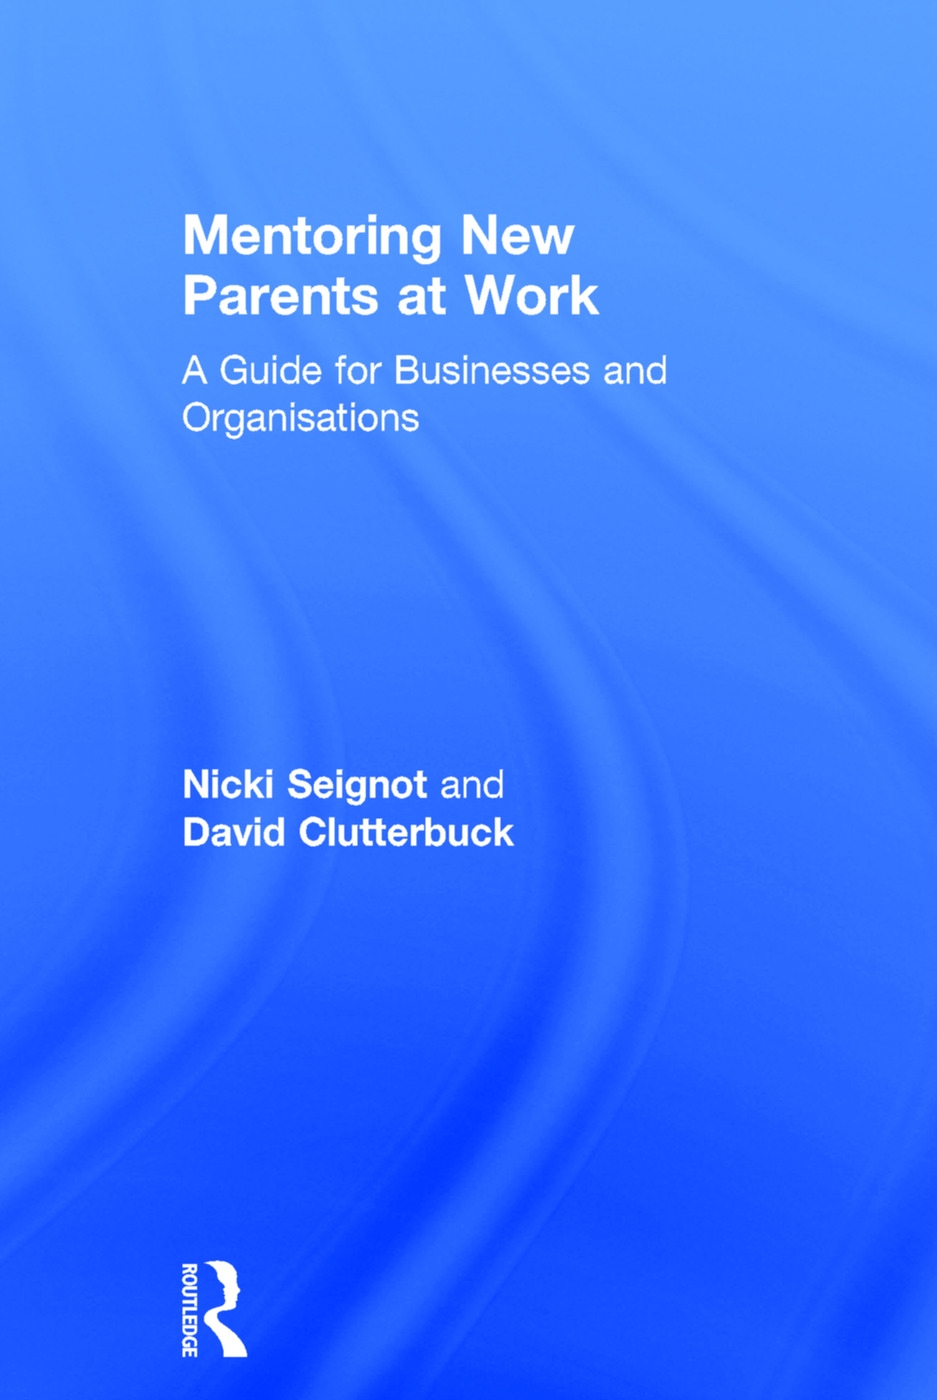 Mentoring New Parents at Work: A practical guide for employees and businesses